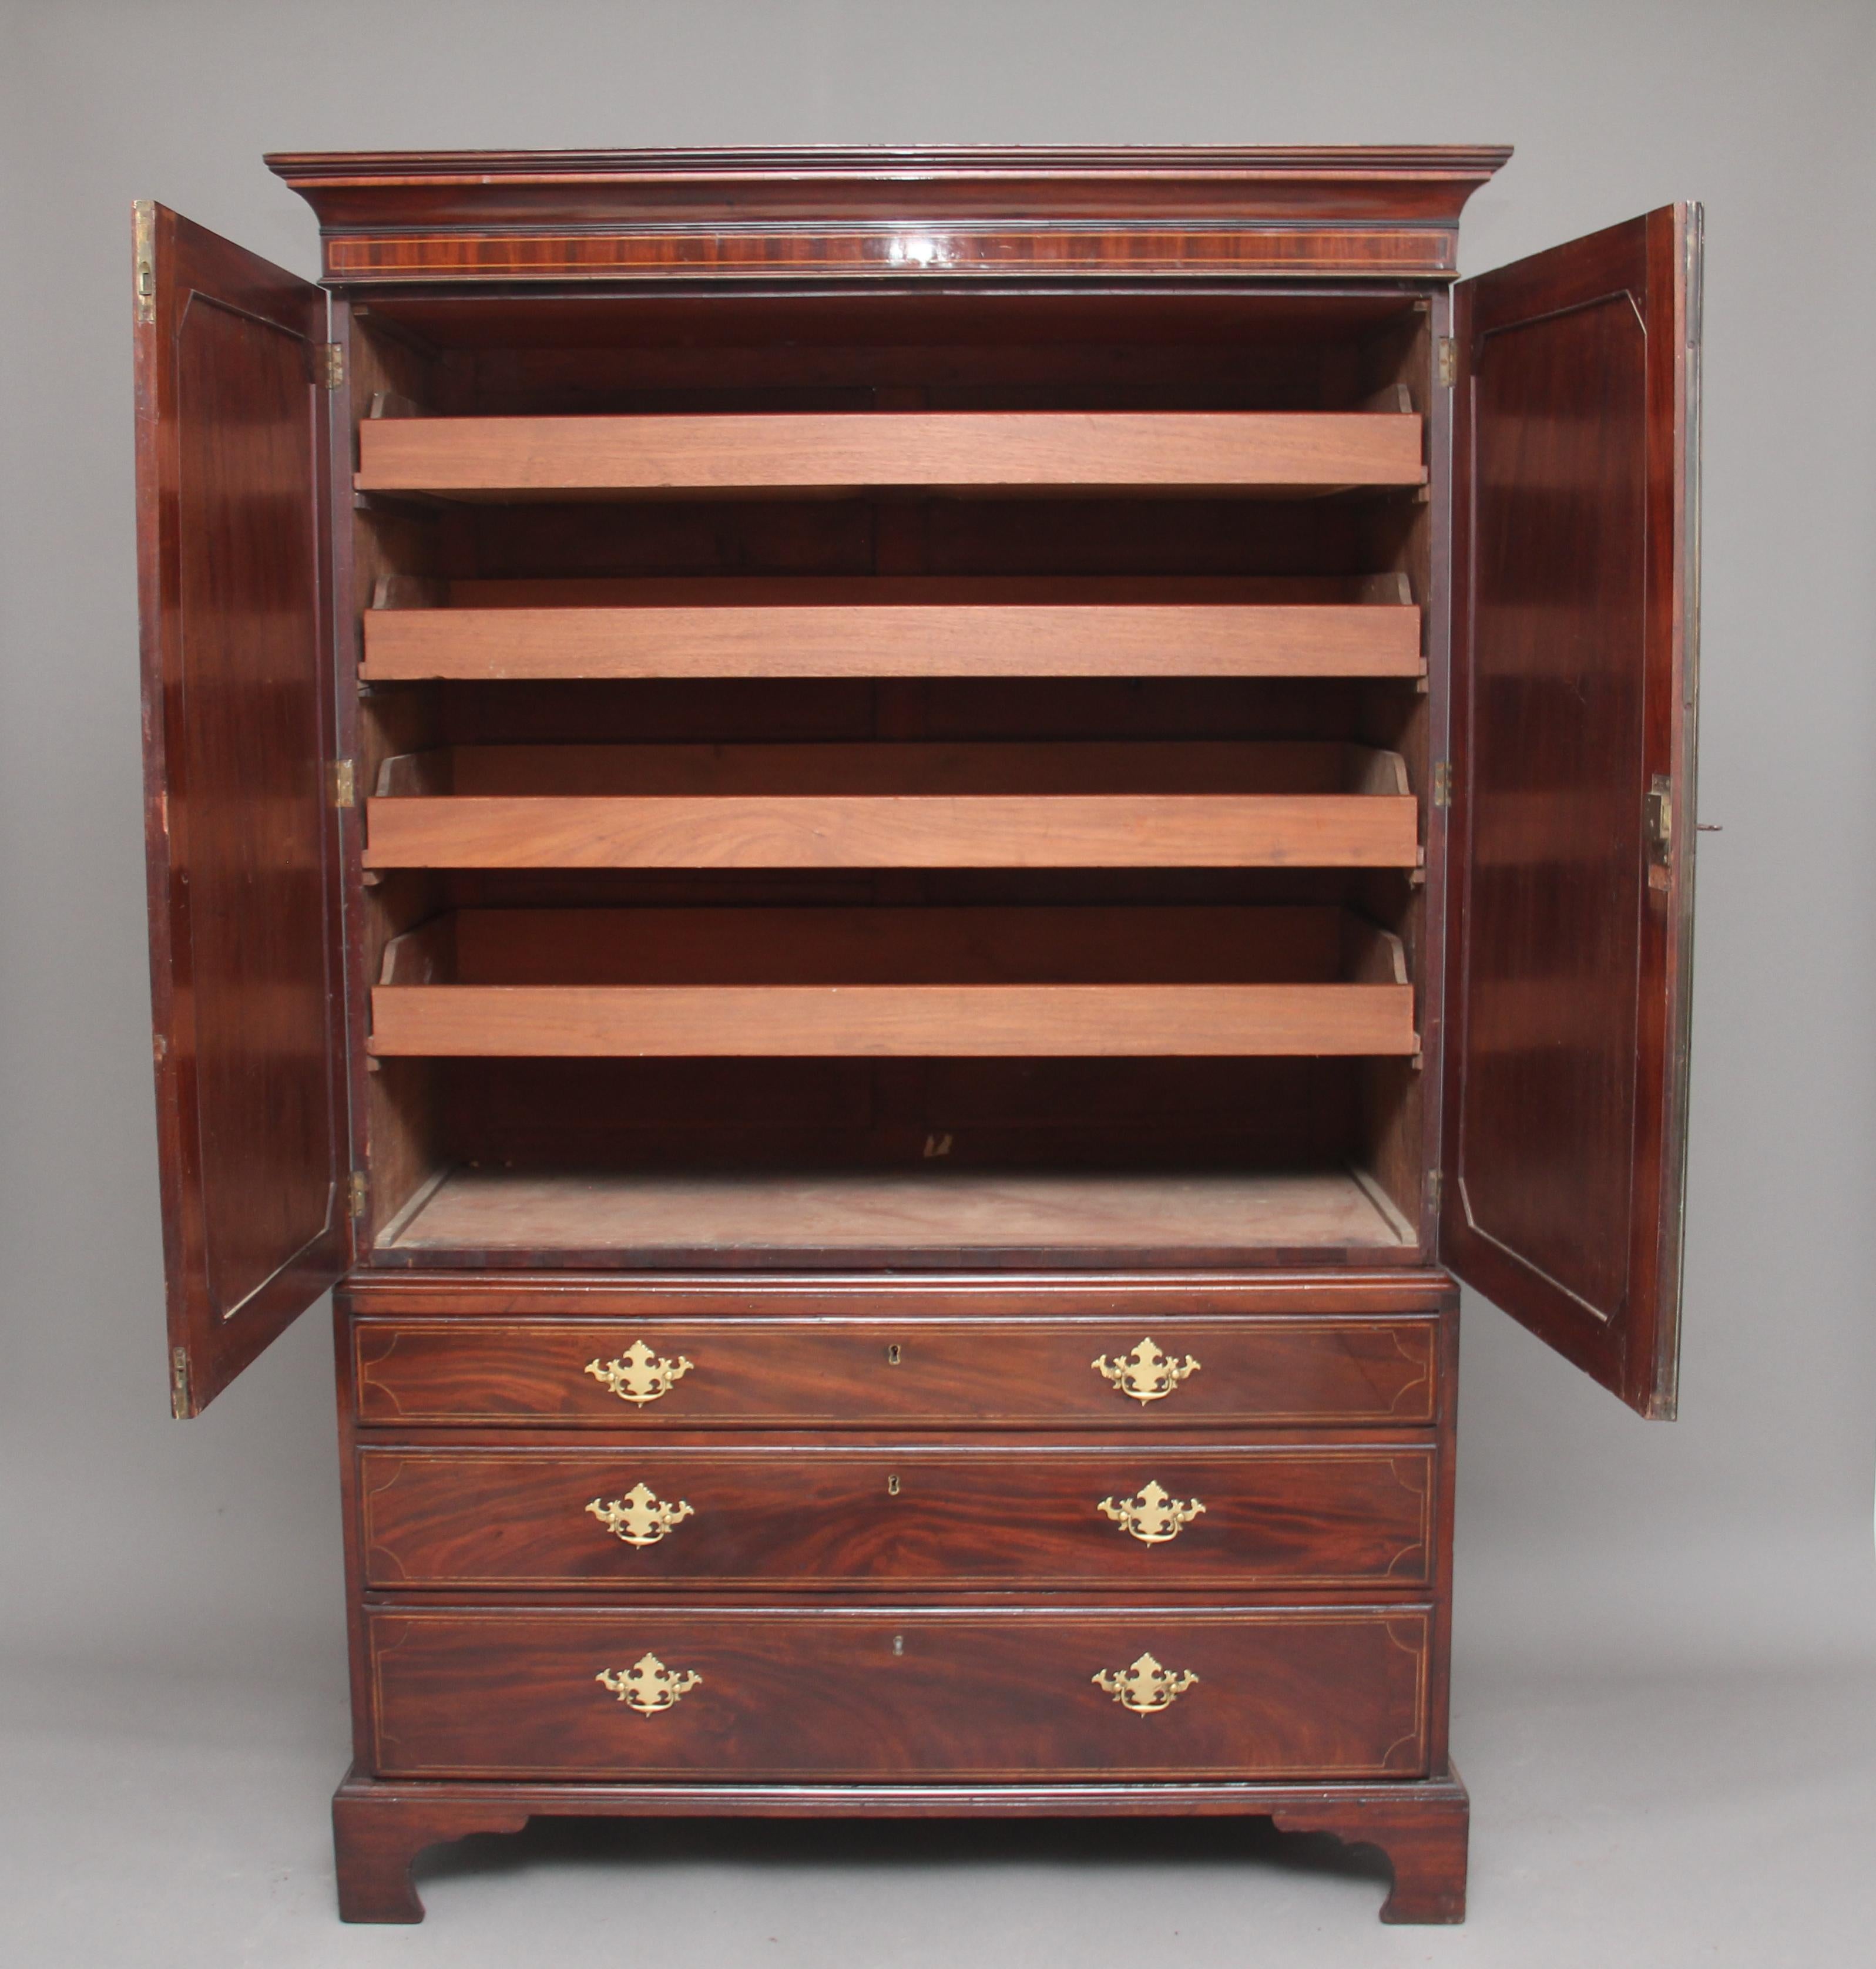 Early 19th century mahogany and inlaid press cupboard, with a stepped moulded cornice above a two door cupboard, the doors opening to reveal four pull-out trays / drawers, the door fronts inlaid with boxwood lines, urns, swags and floral decoration